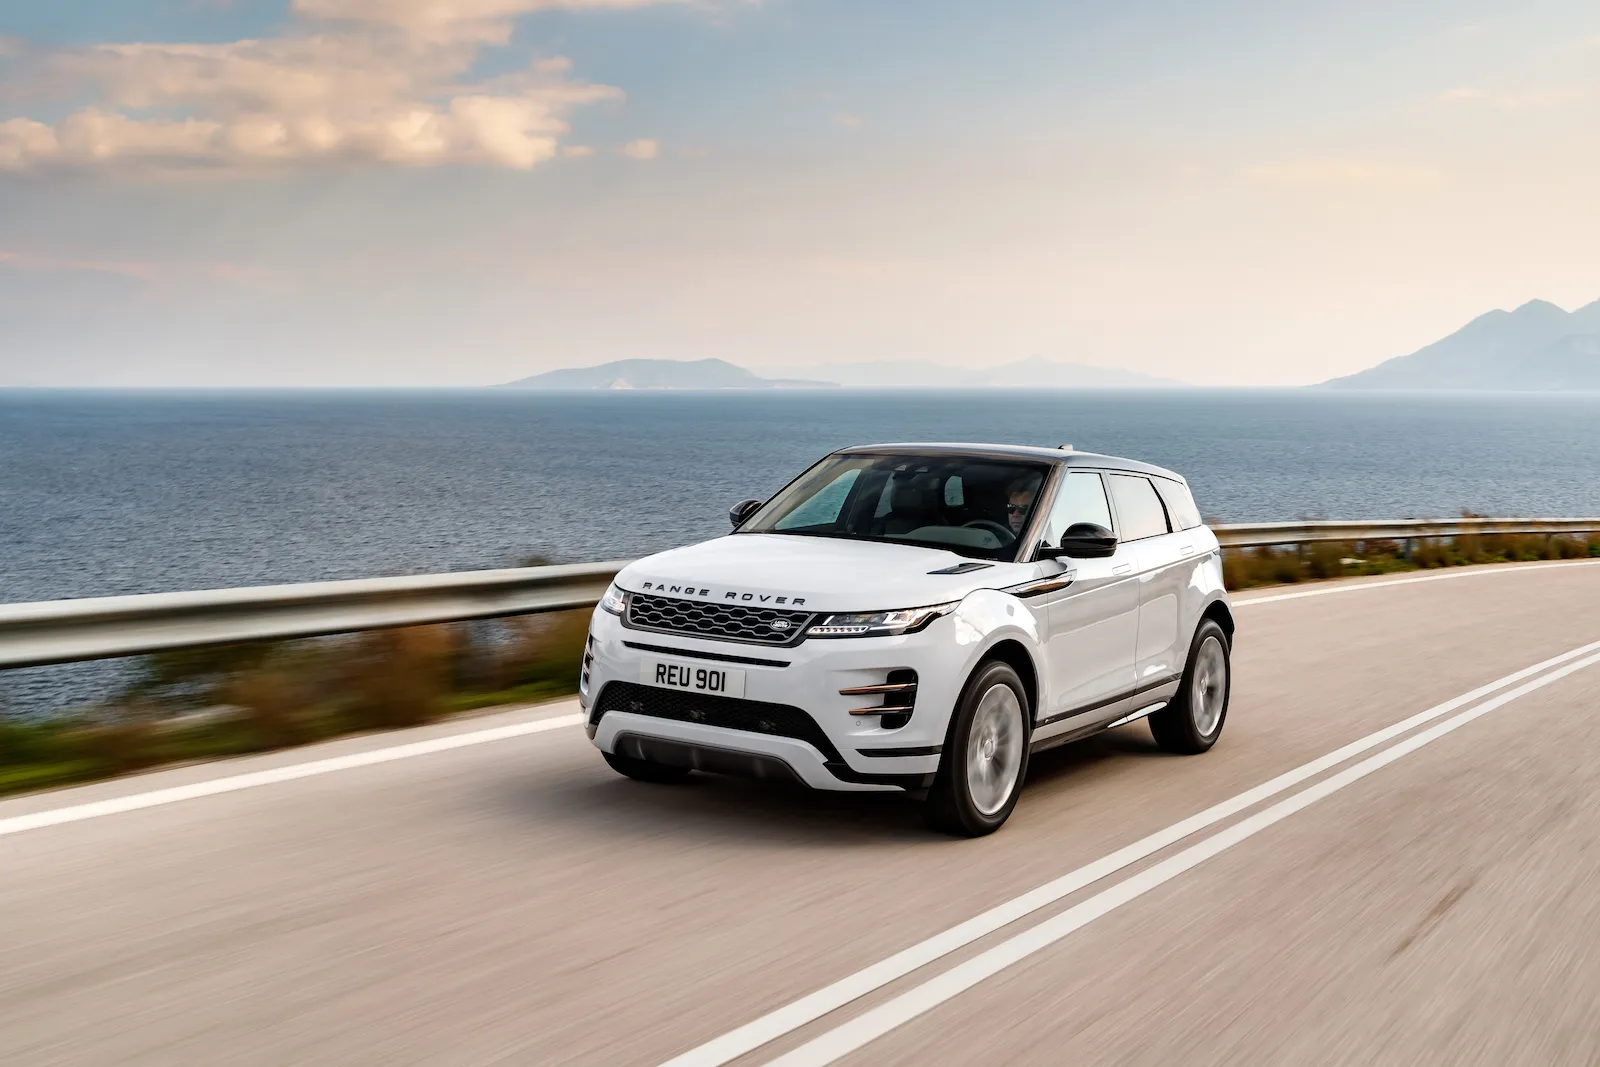 2019 Land Rover Range Rover Evoque - News, reviews, picture galleries and  videos - The Car Guide